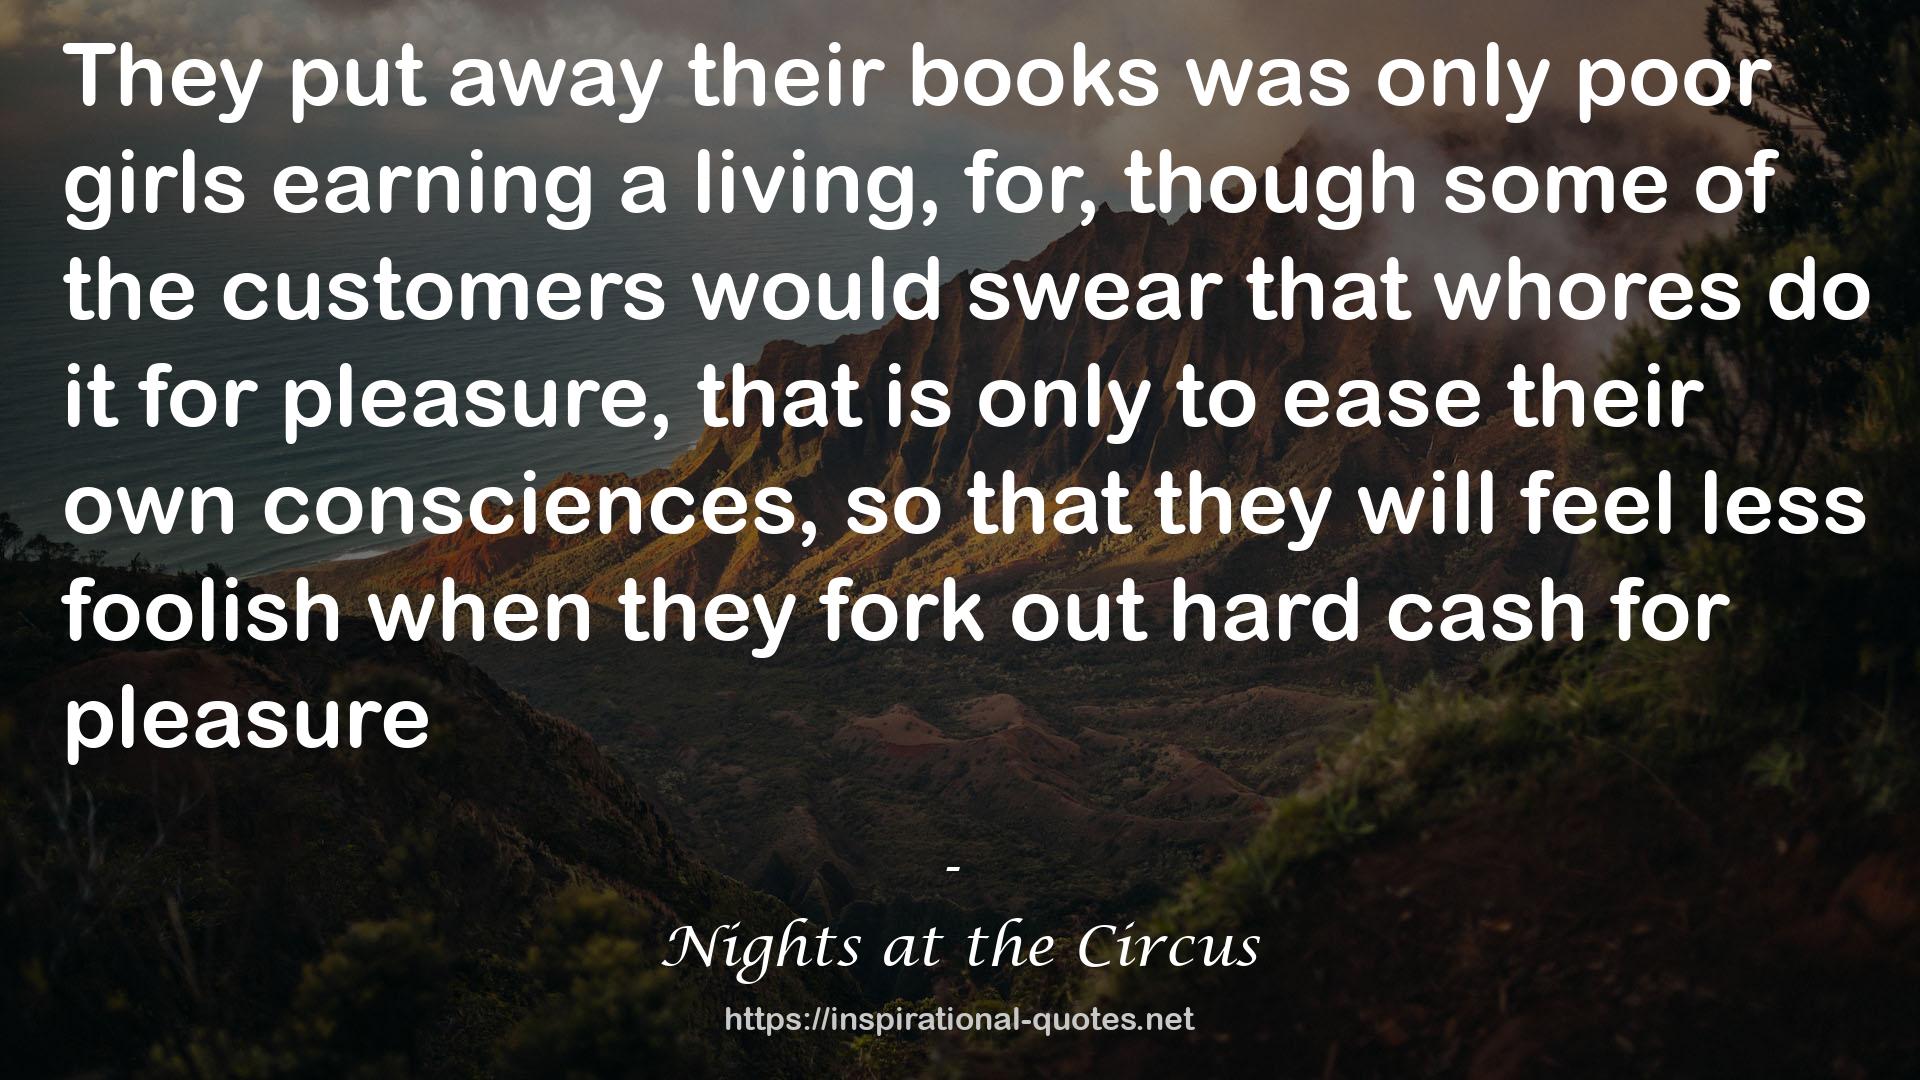 Nights at the Circus QUOTES